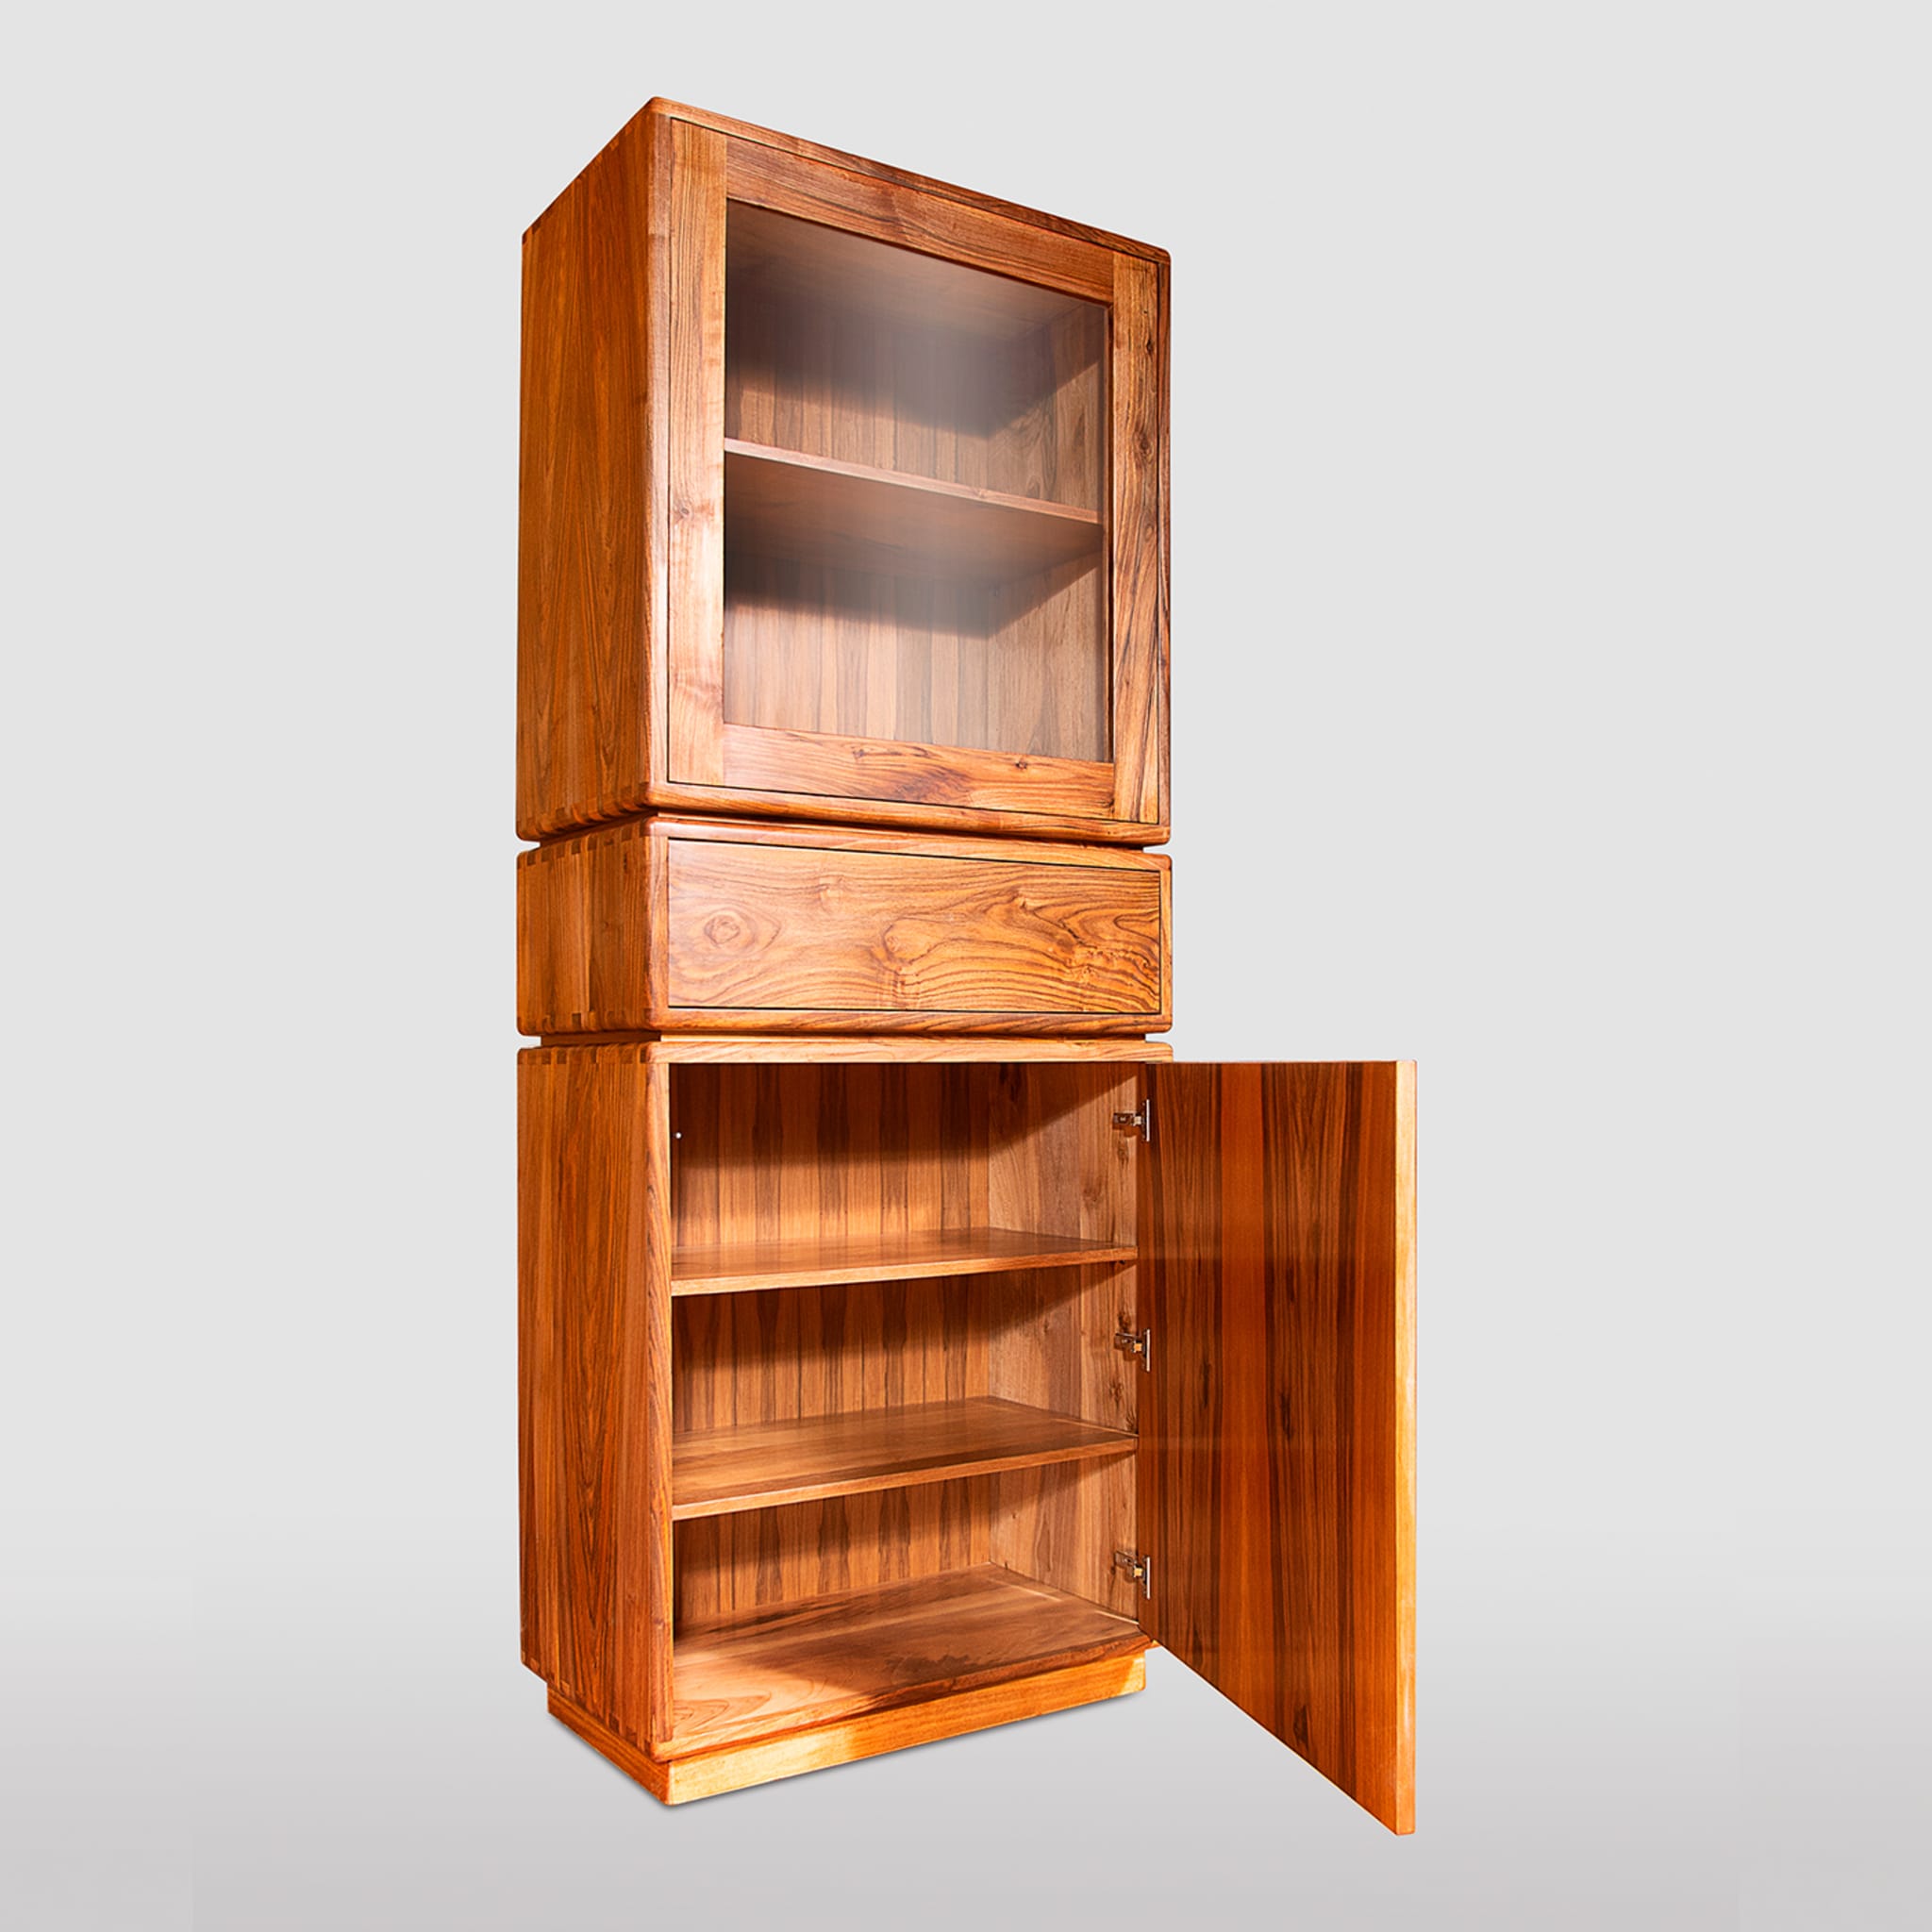 Dovetail Cabinet by Eugenio Gambella - Alternative view 3